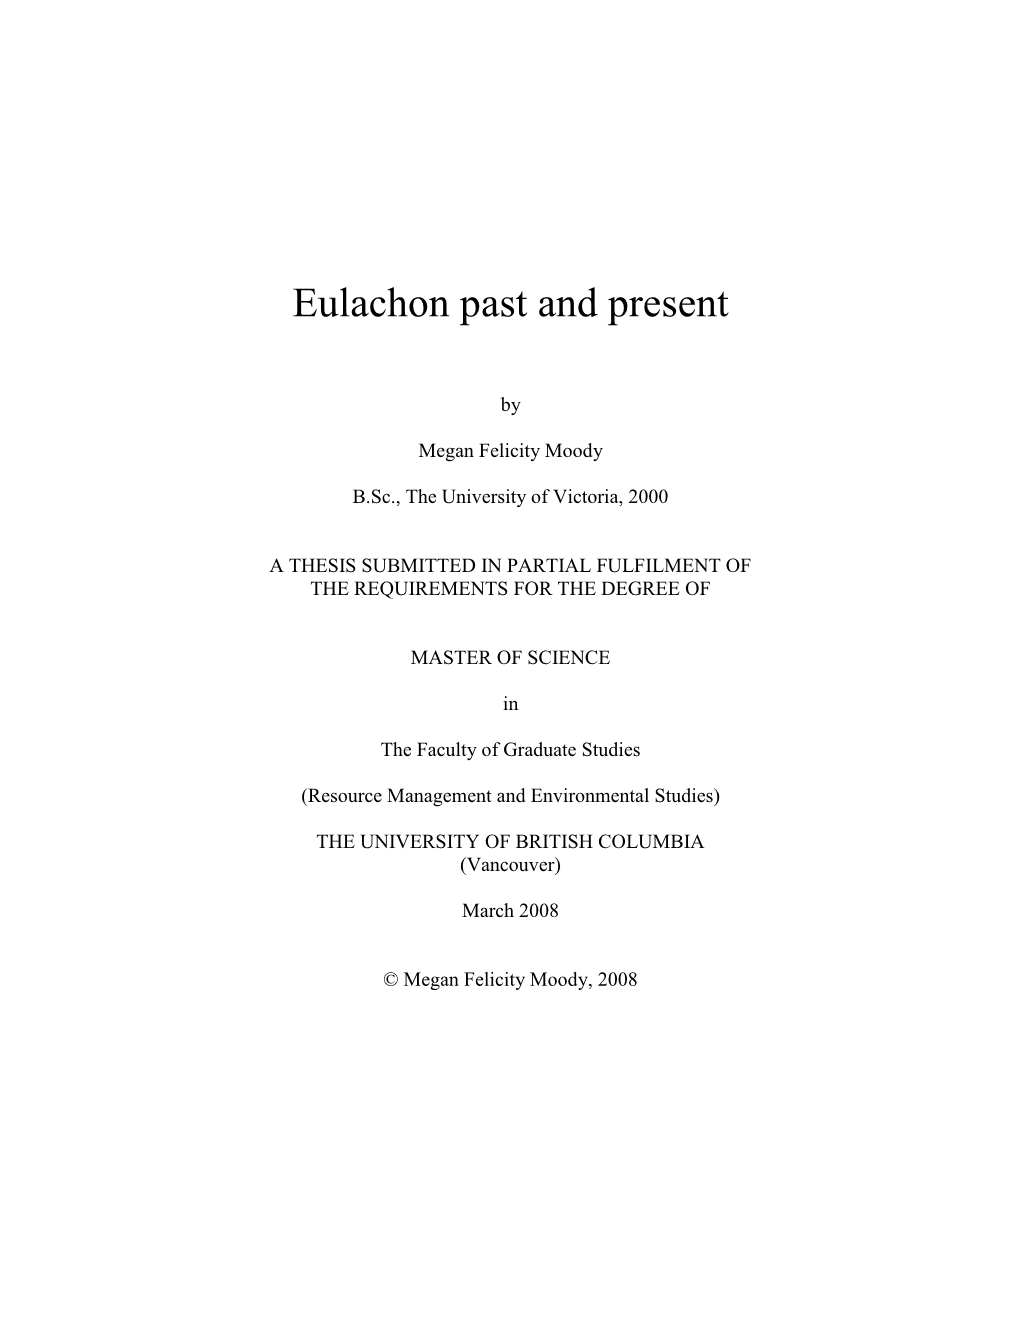 Eulachon Past and Present